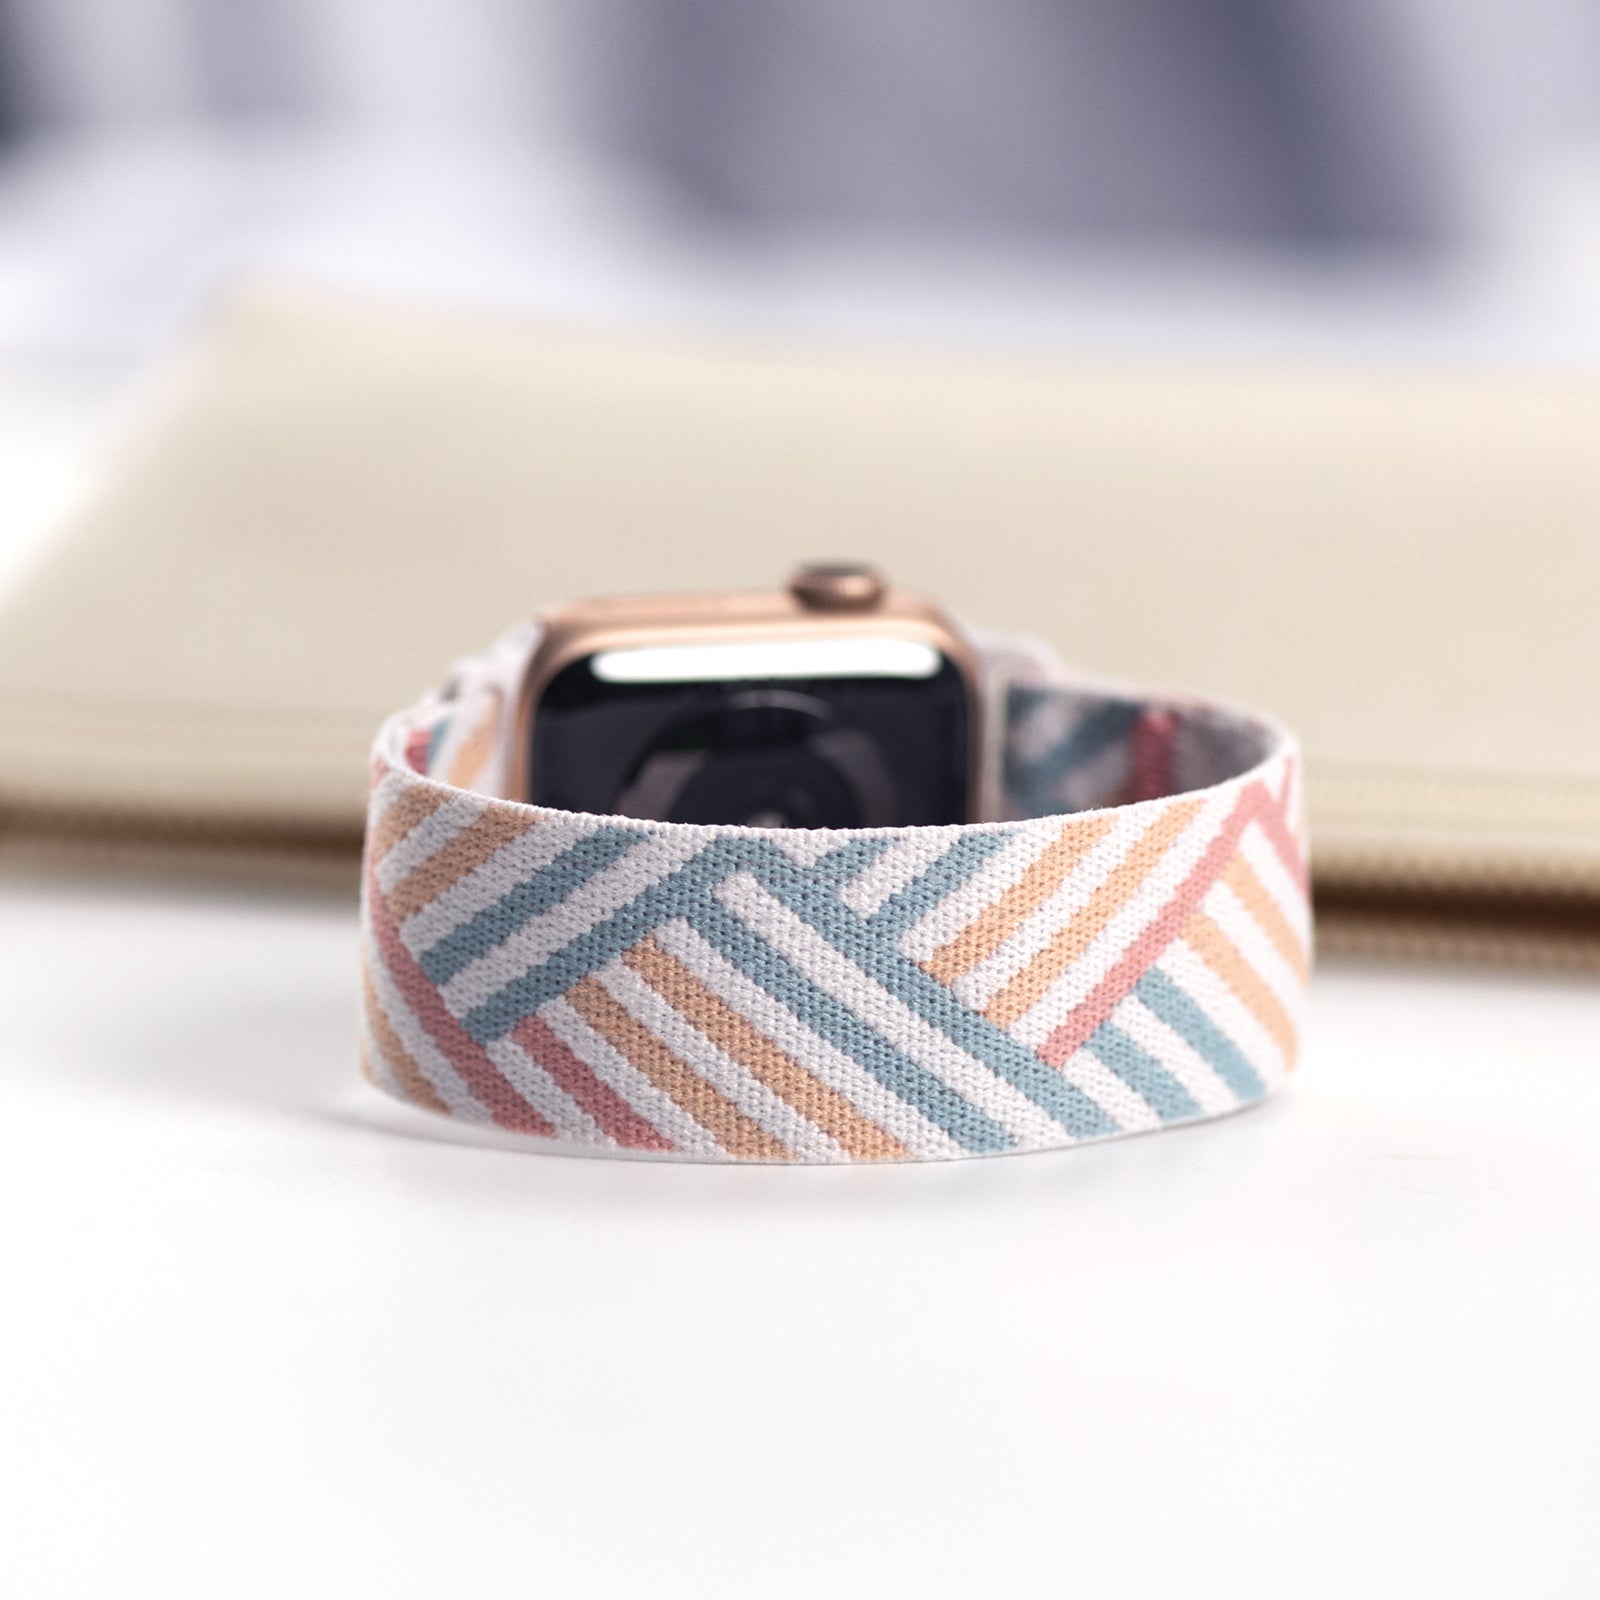 Burberry Apple Watch Band 